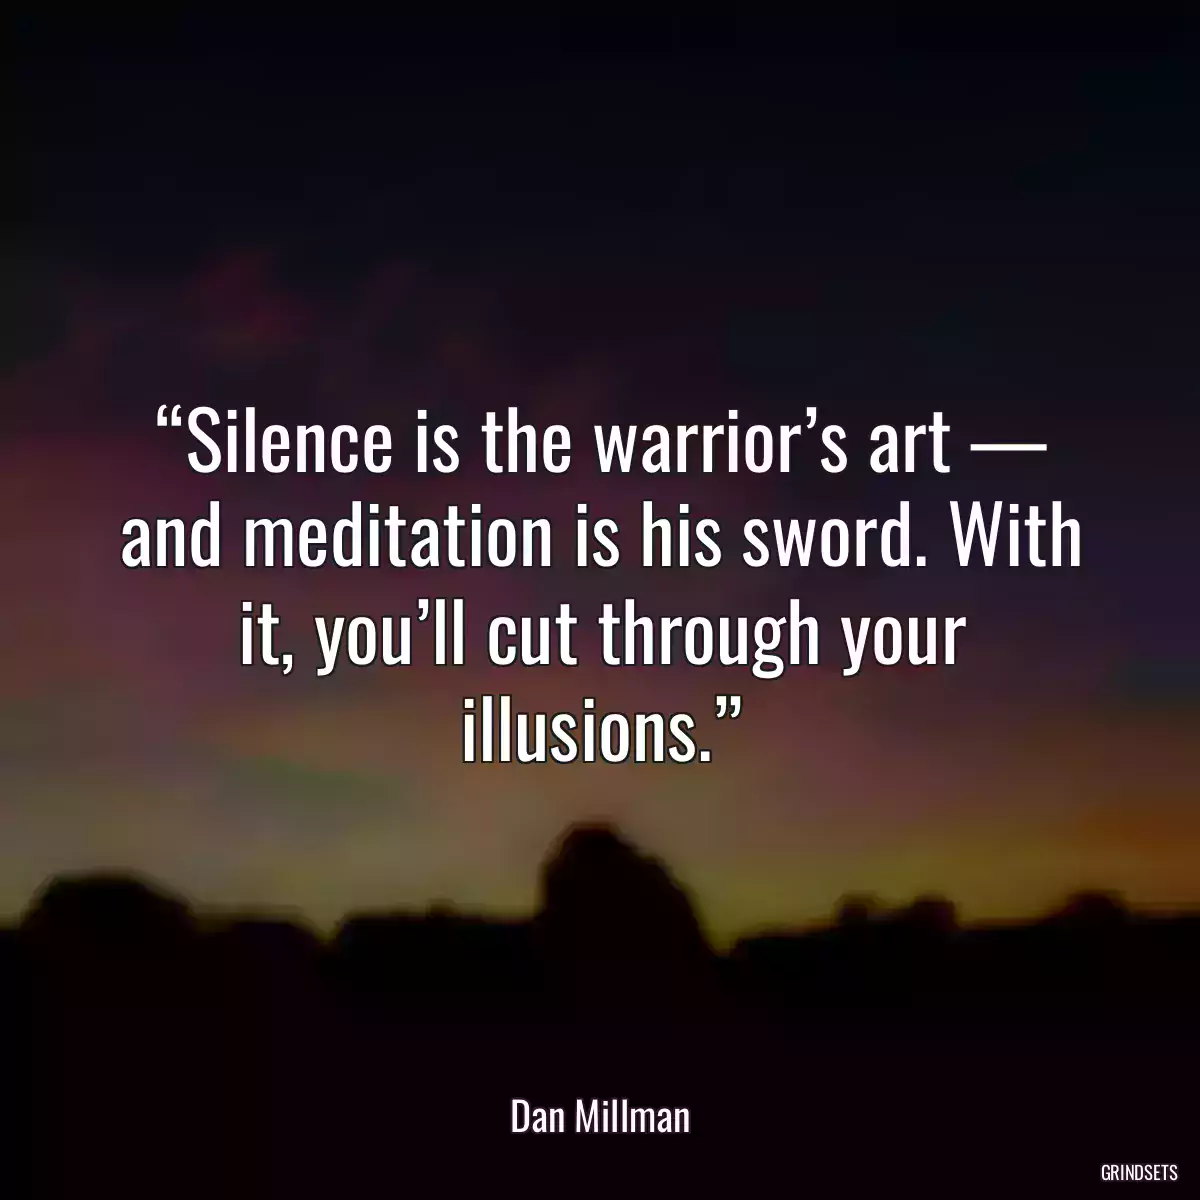 “Silence is the warrior’s art — and meditation is his sword. With it, you’ll cut through your illusions.”